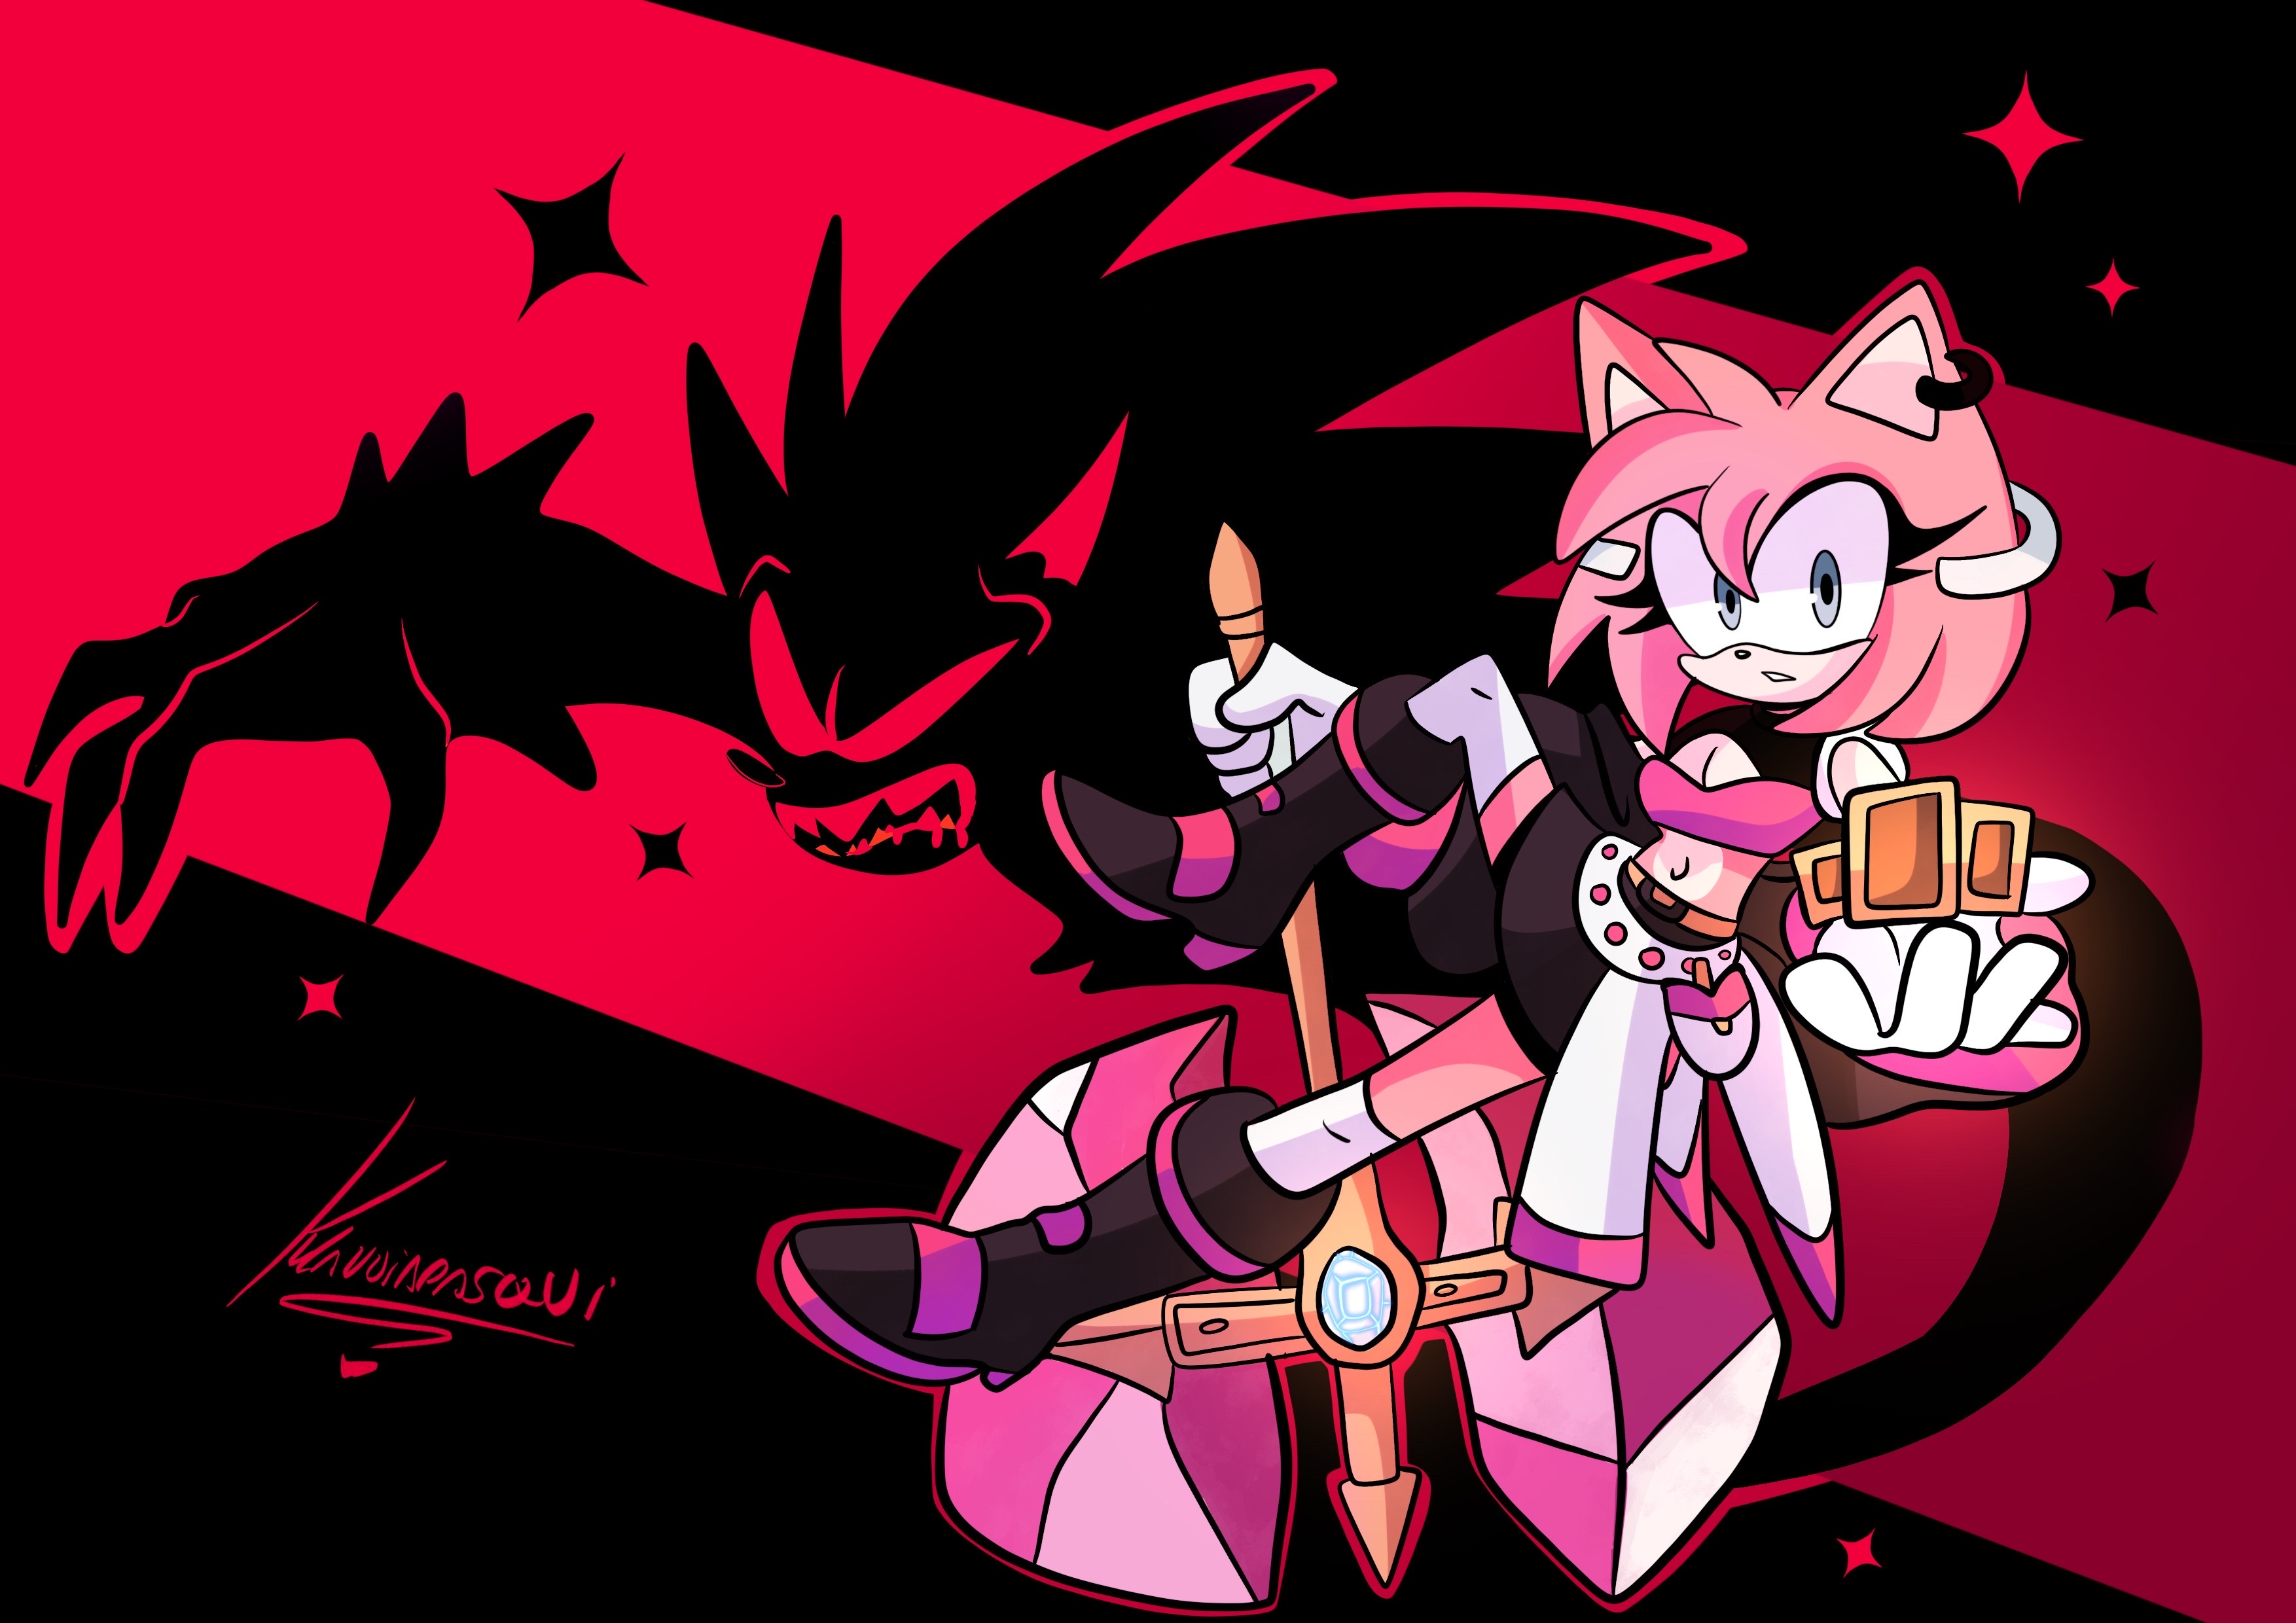 sonic the hedgehog, amy rose, and shadow the hedgehog (sonic) drawn by  chinchila010